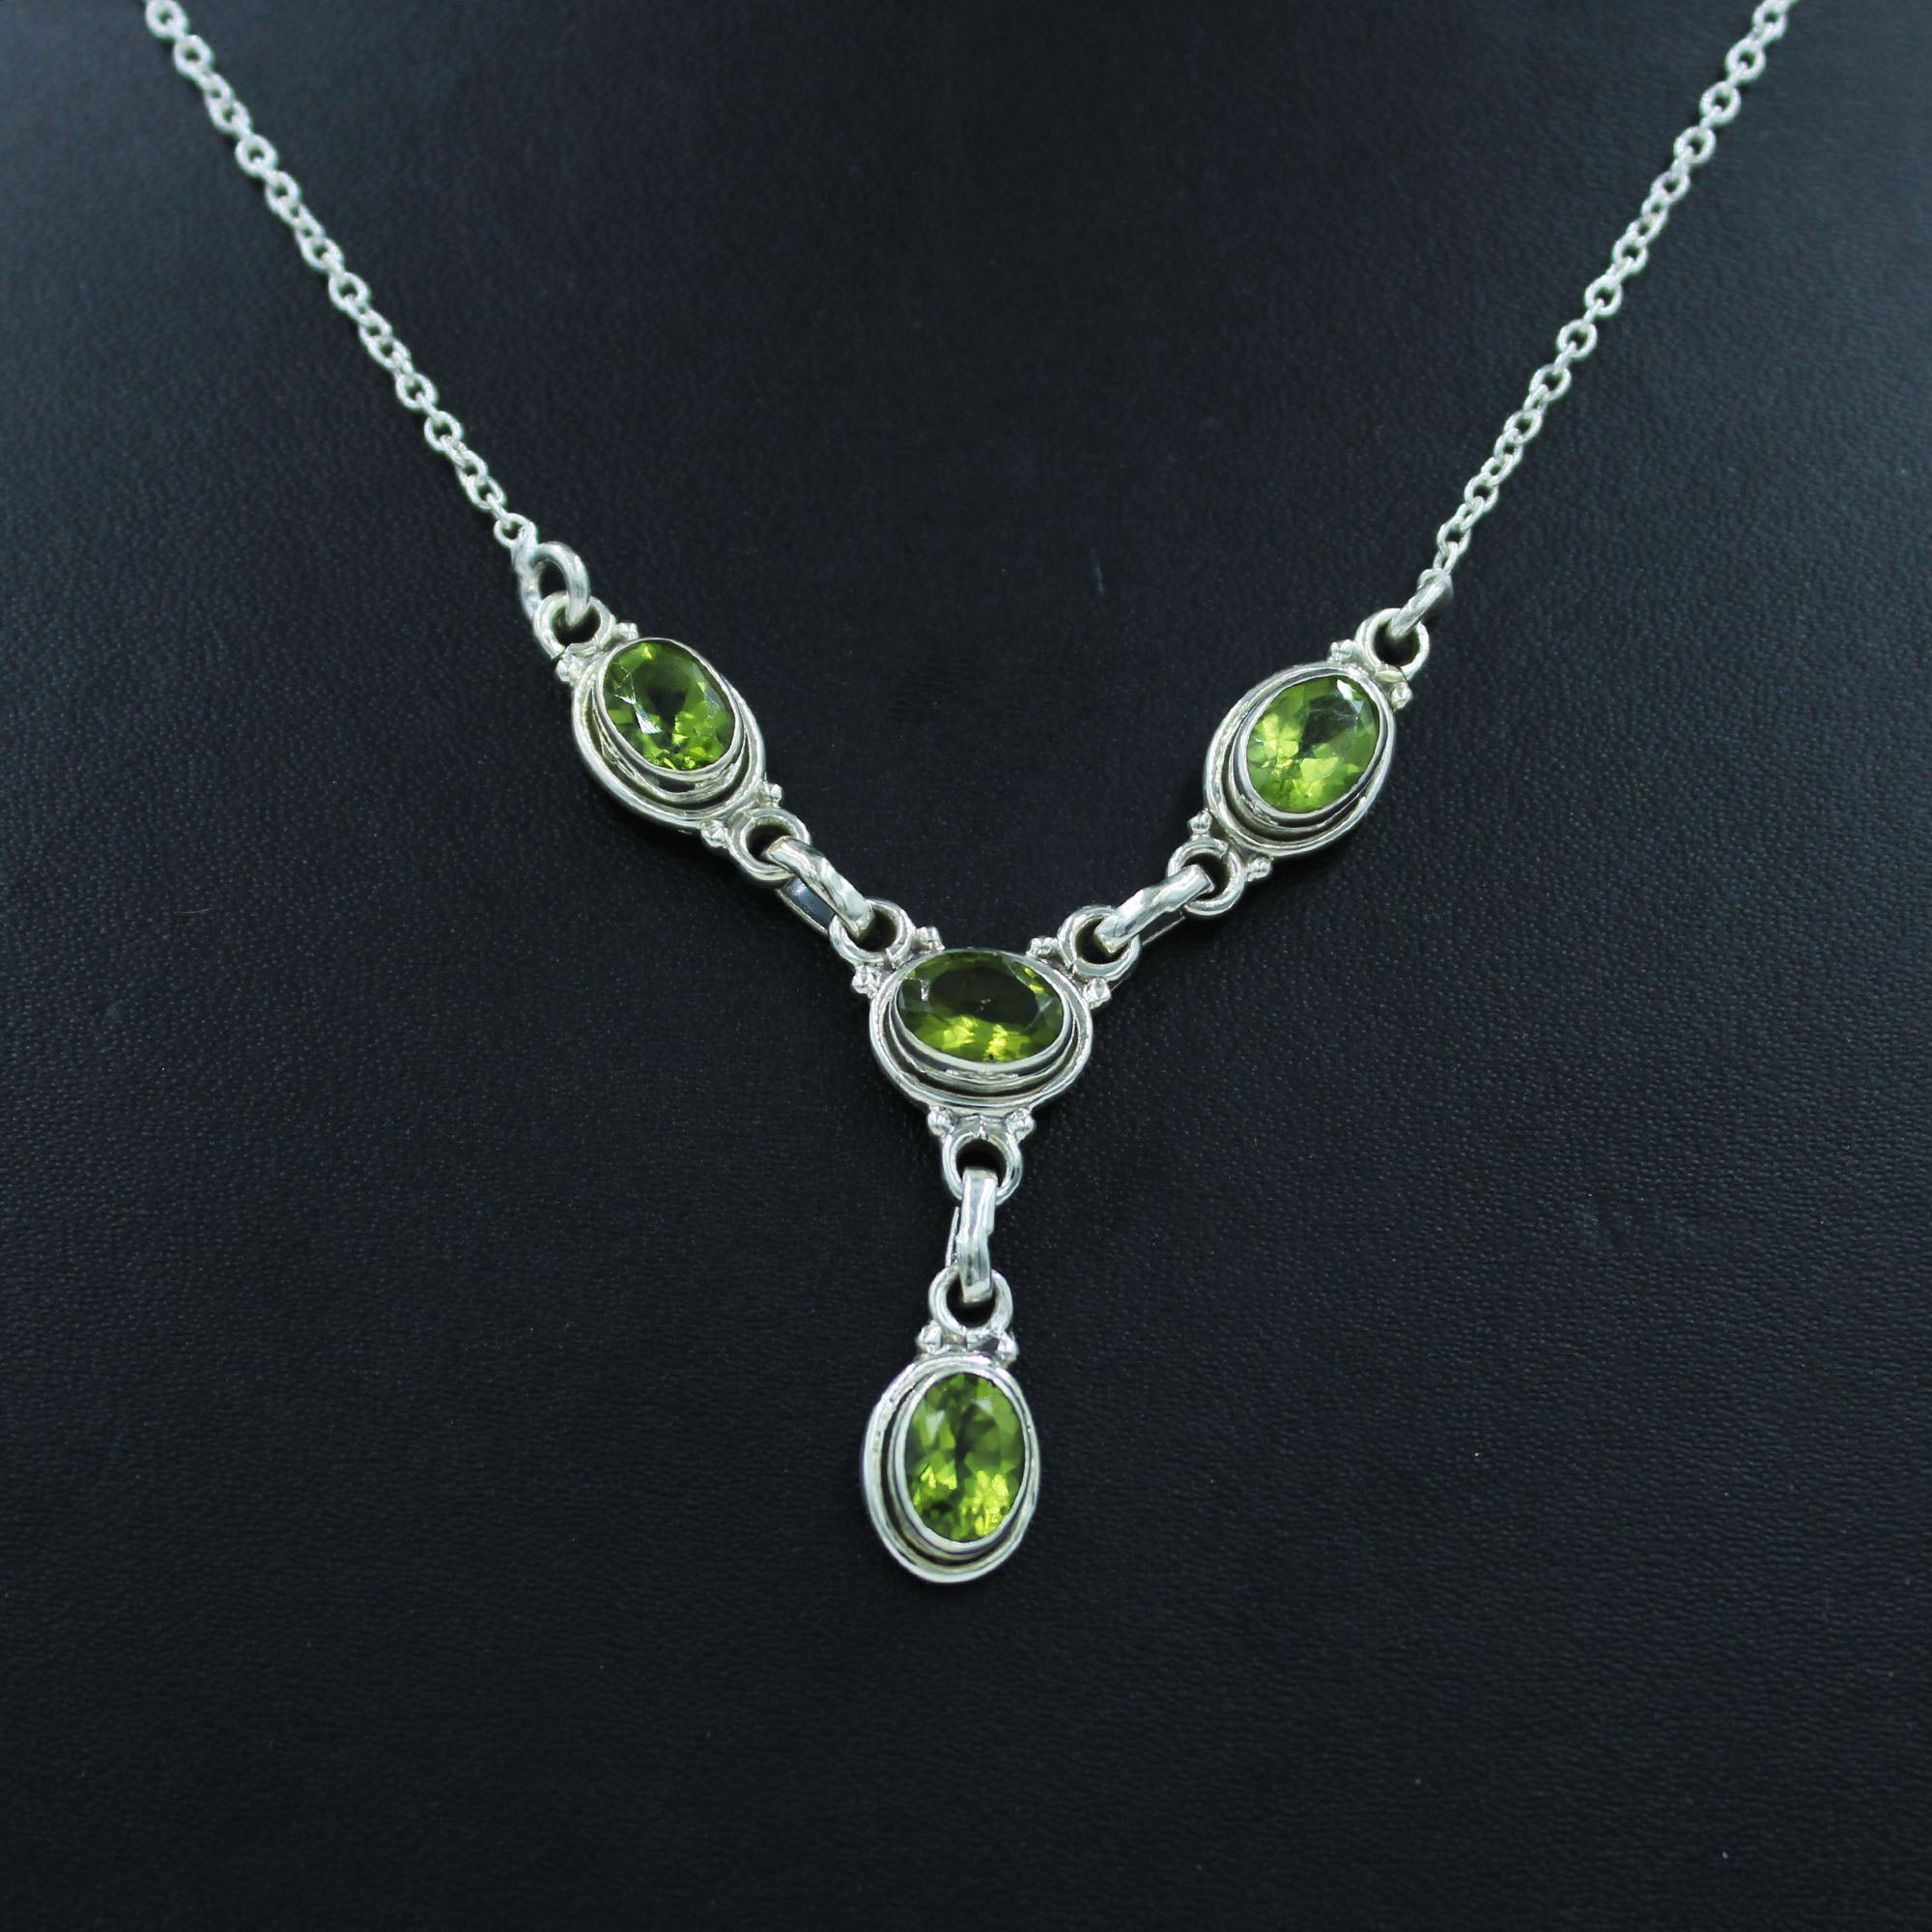 New Design Peridot Sterling Silver Necklace